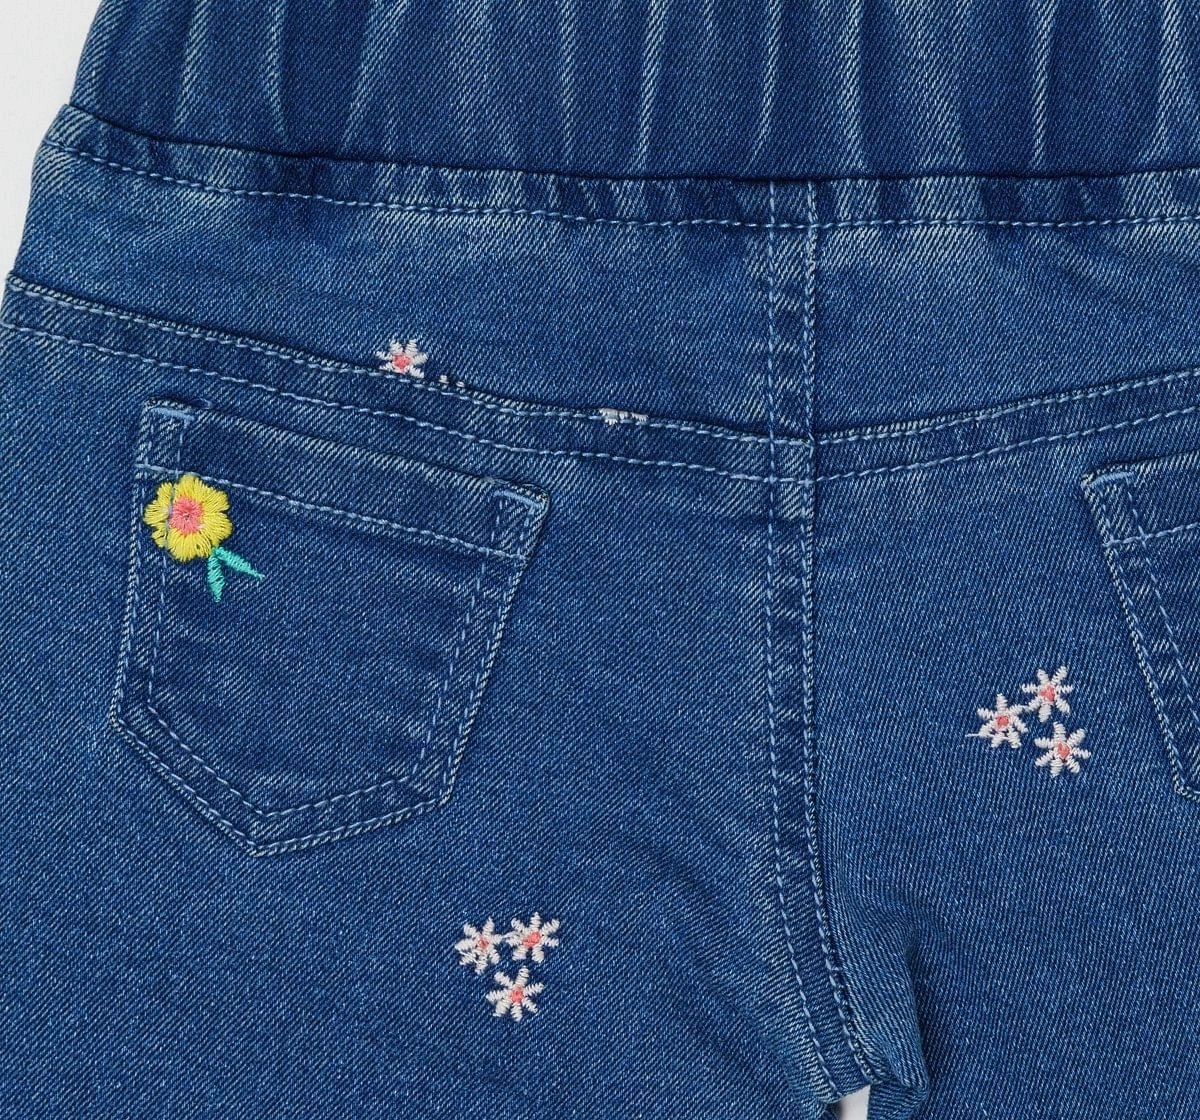 Girls Jeans Floral Embroidery-Multicolor